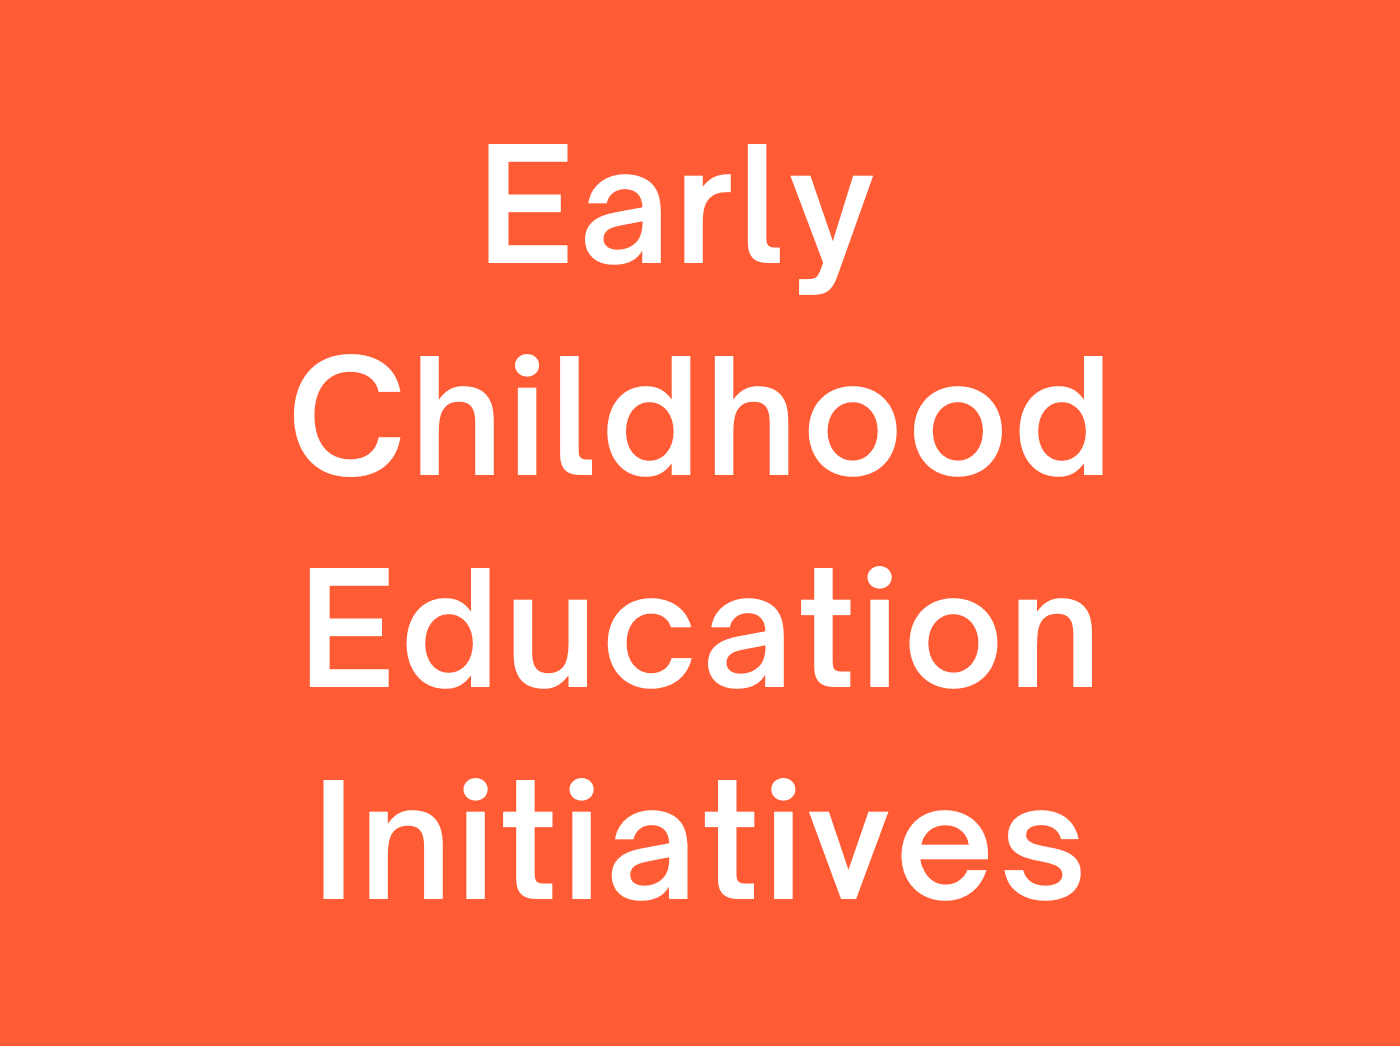 Early Childhood Education Initiatives